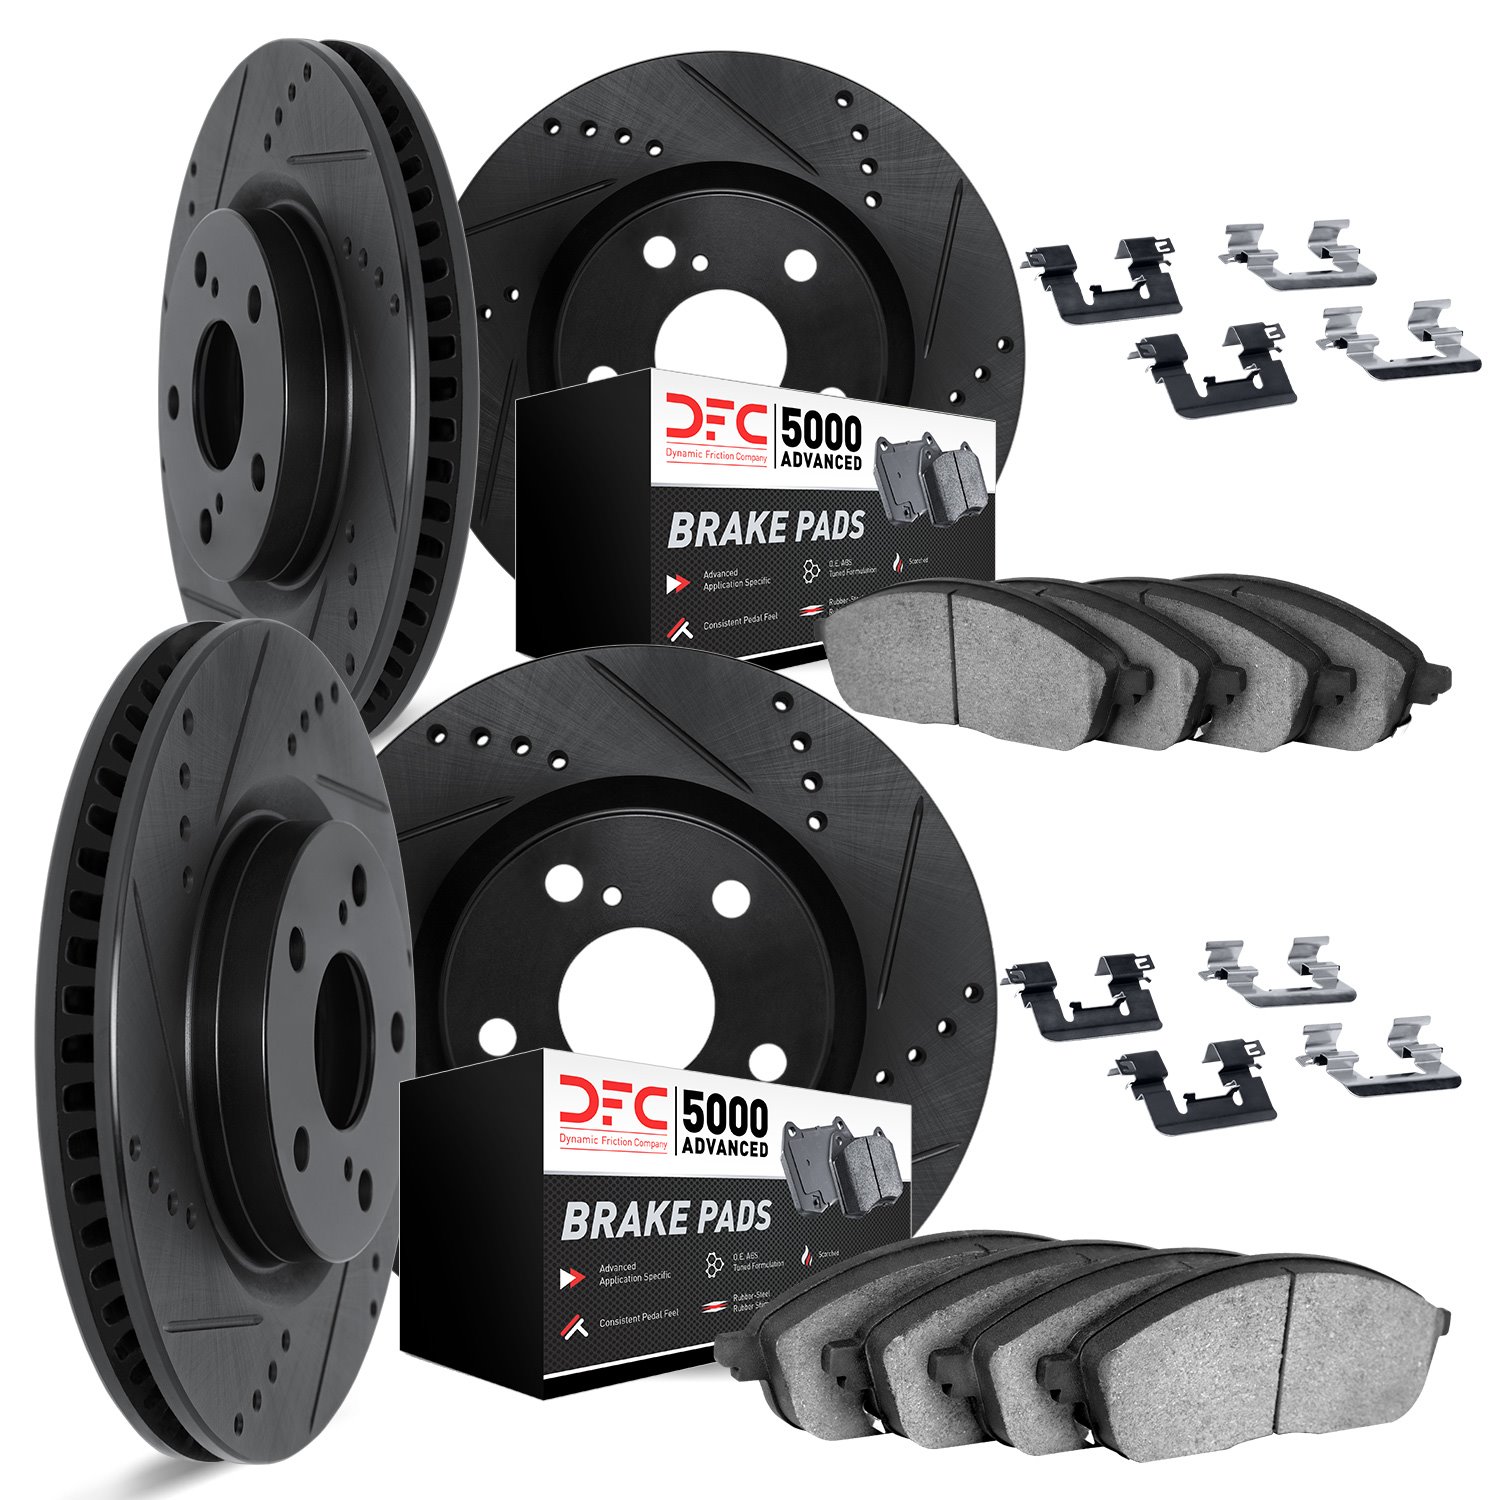 8514-27019 Drilled/Slotted Brake Rotors w/5000 Advanced Brake Pads Kit & Hardware [Black], 2016-2020 Volvo, Position: Front and